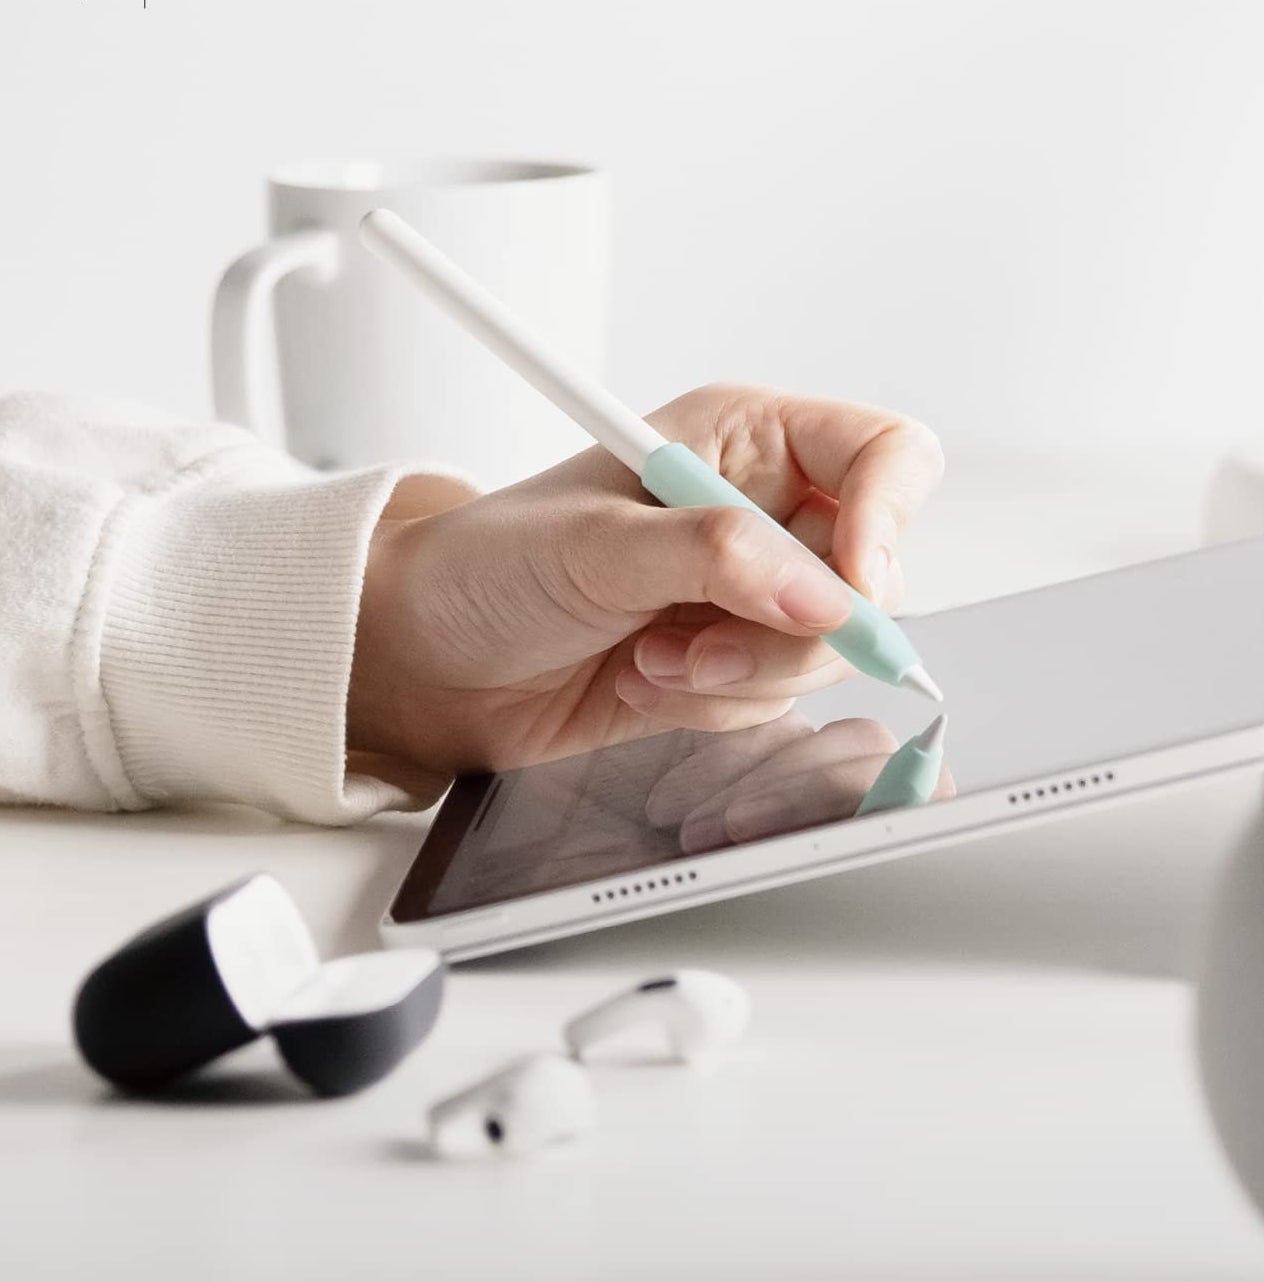 A person using their Apple Pencil with a grip on it